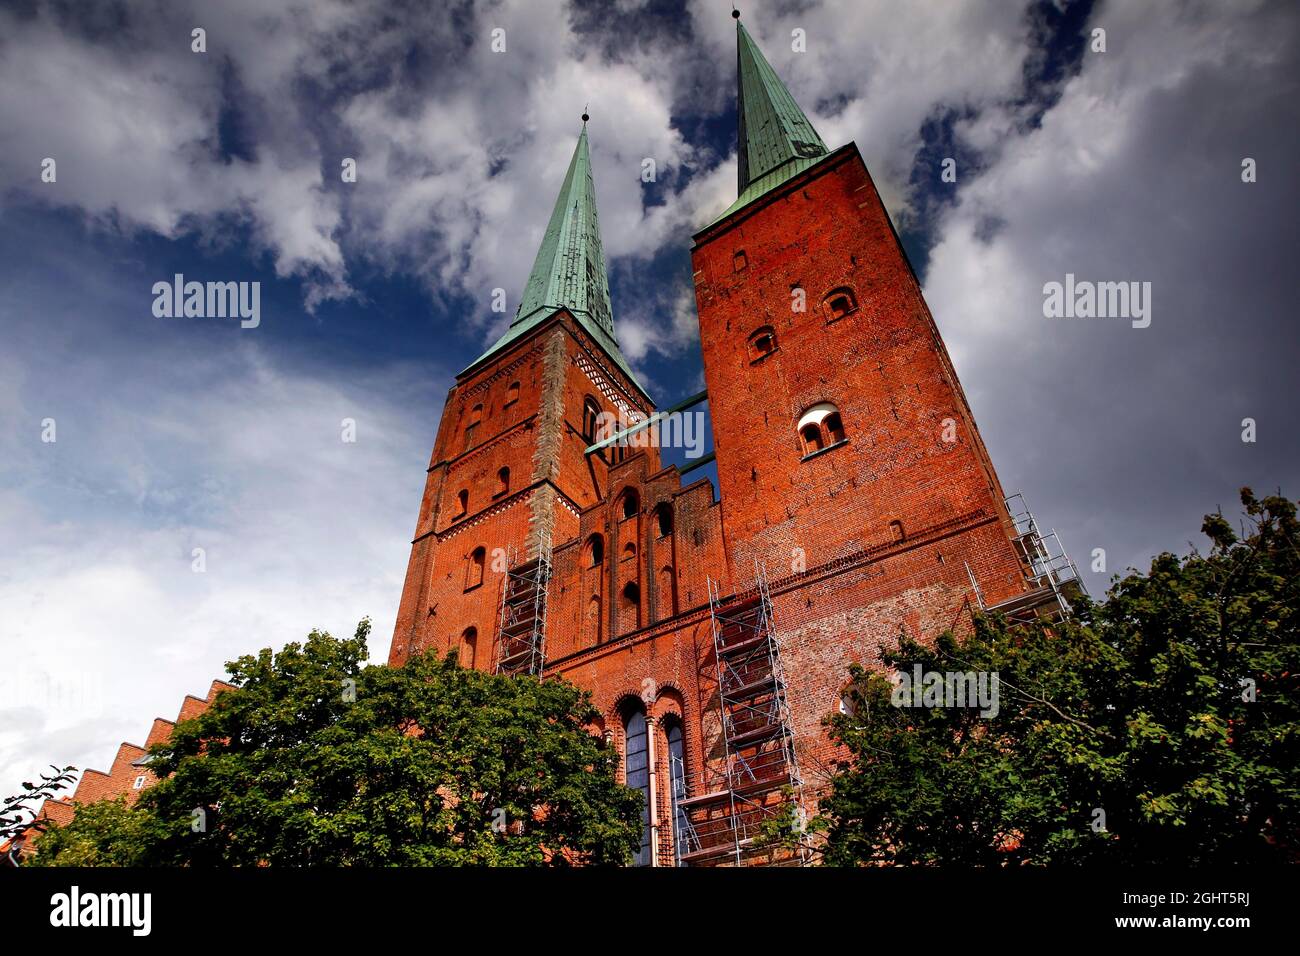 Luebeck Cathedral, brick Gothic towers, UNESCO World Heritage Site Hanseatic City of Luebeck, Schleswig-Holstein, Germany Stock Photo